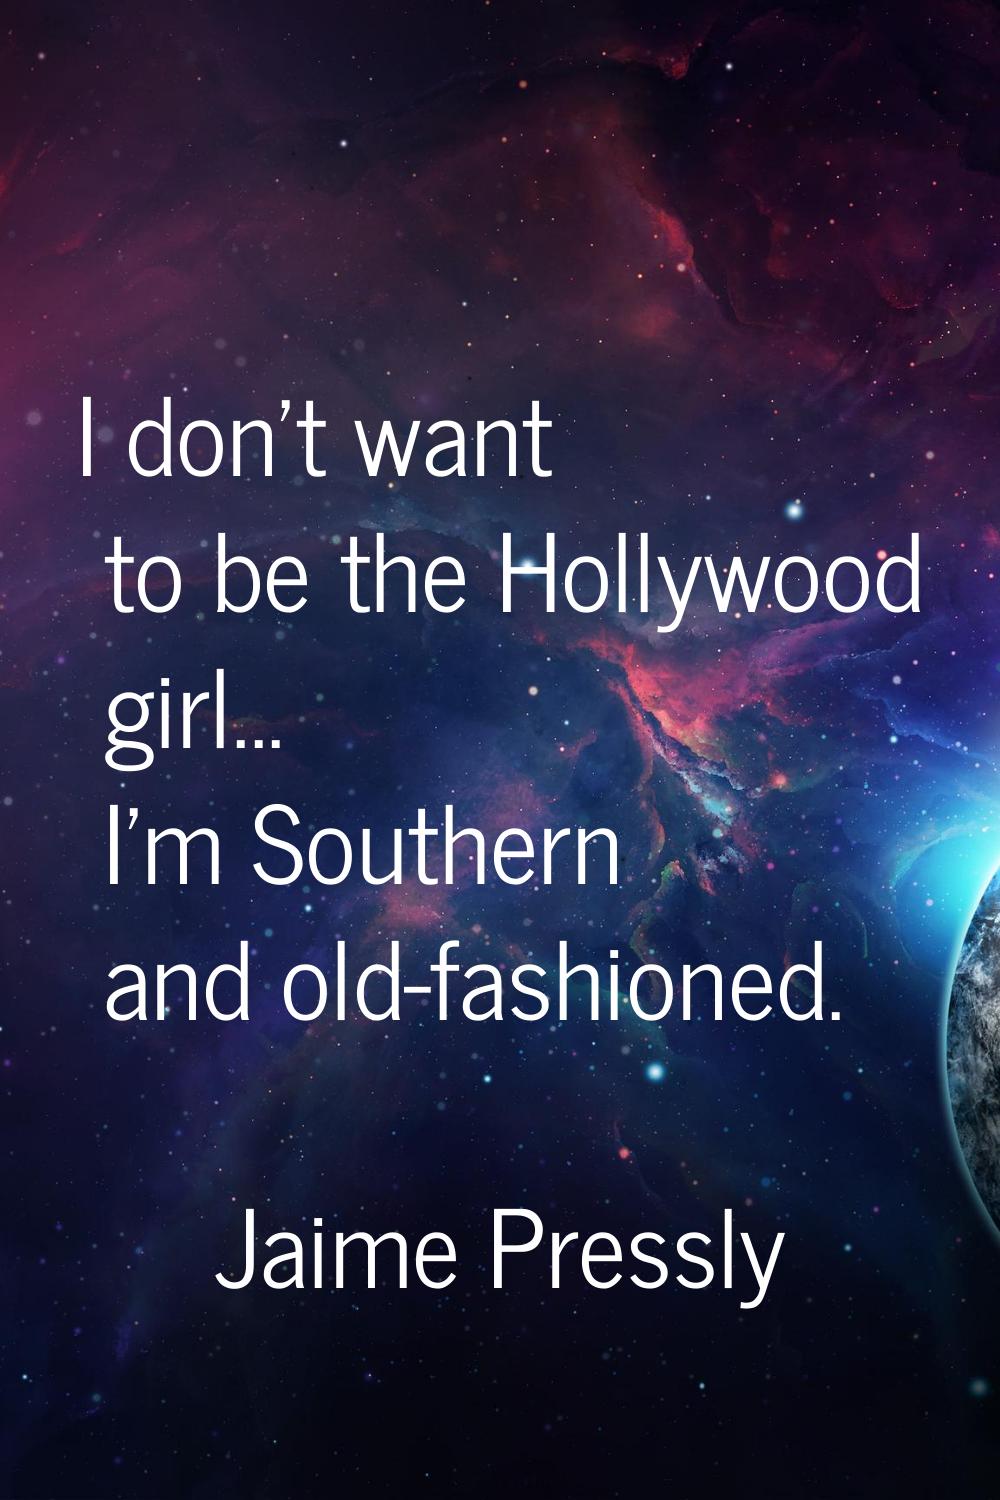 I don't want to be the Hollywood girl... I'm Southern and old-fashioned.